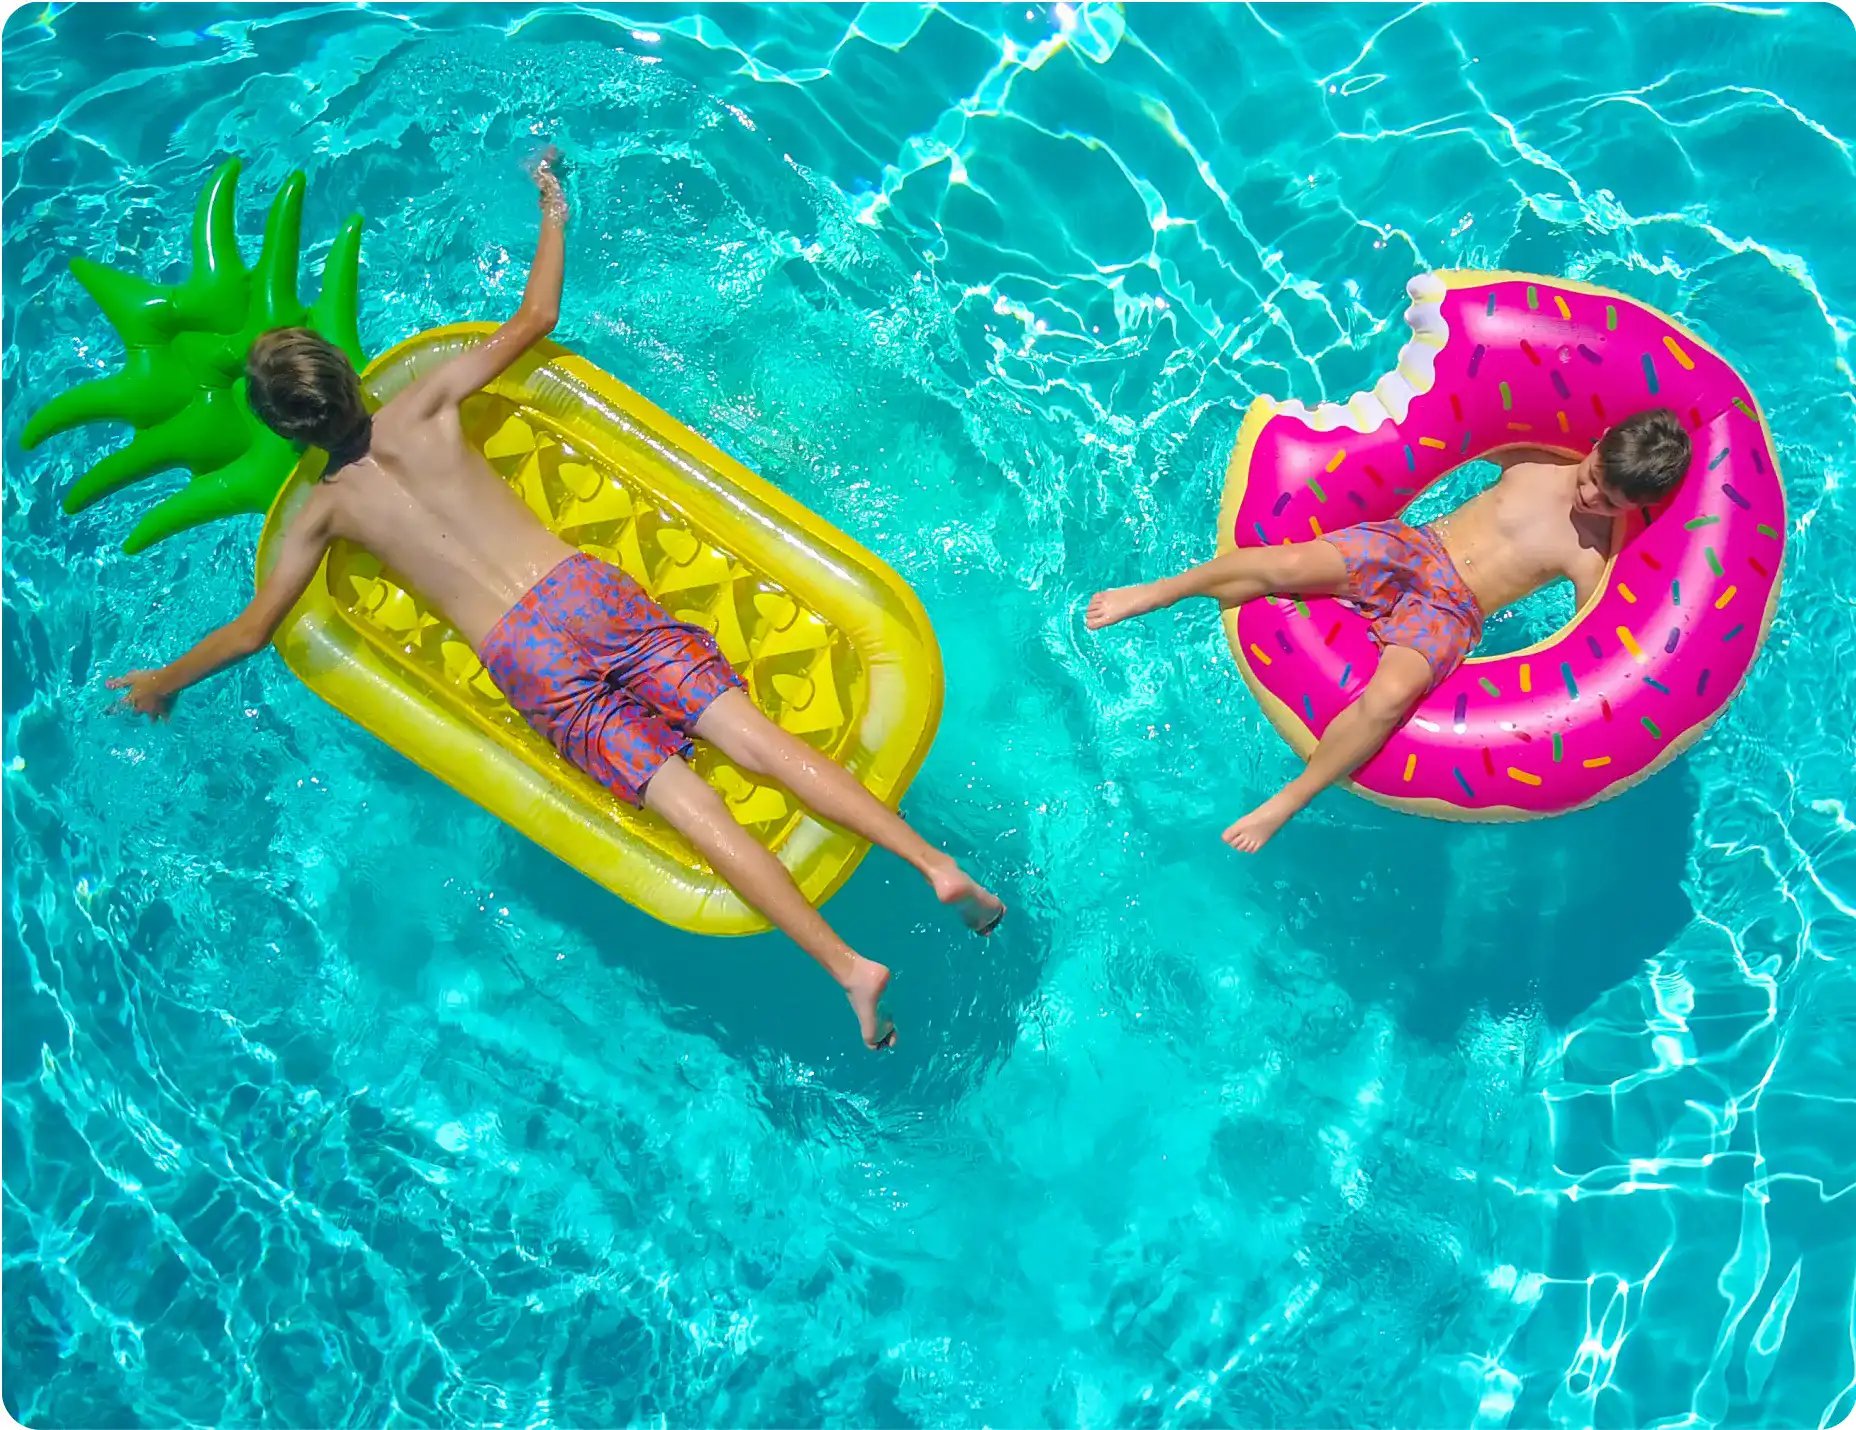 Enjoying a sunny day in the perfect pool on inflatable toys with friends.